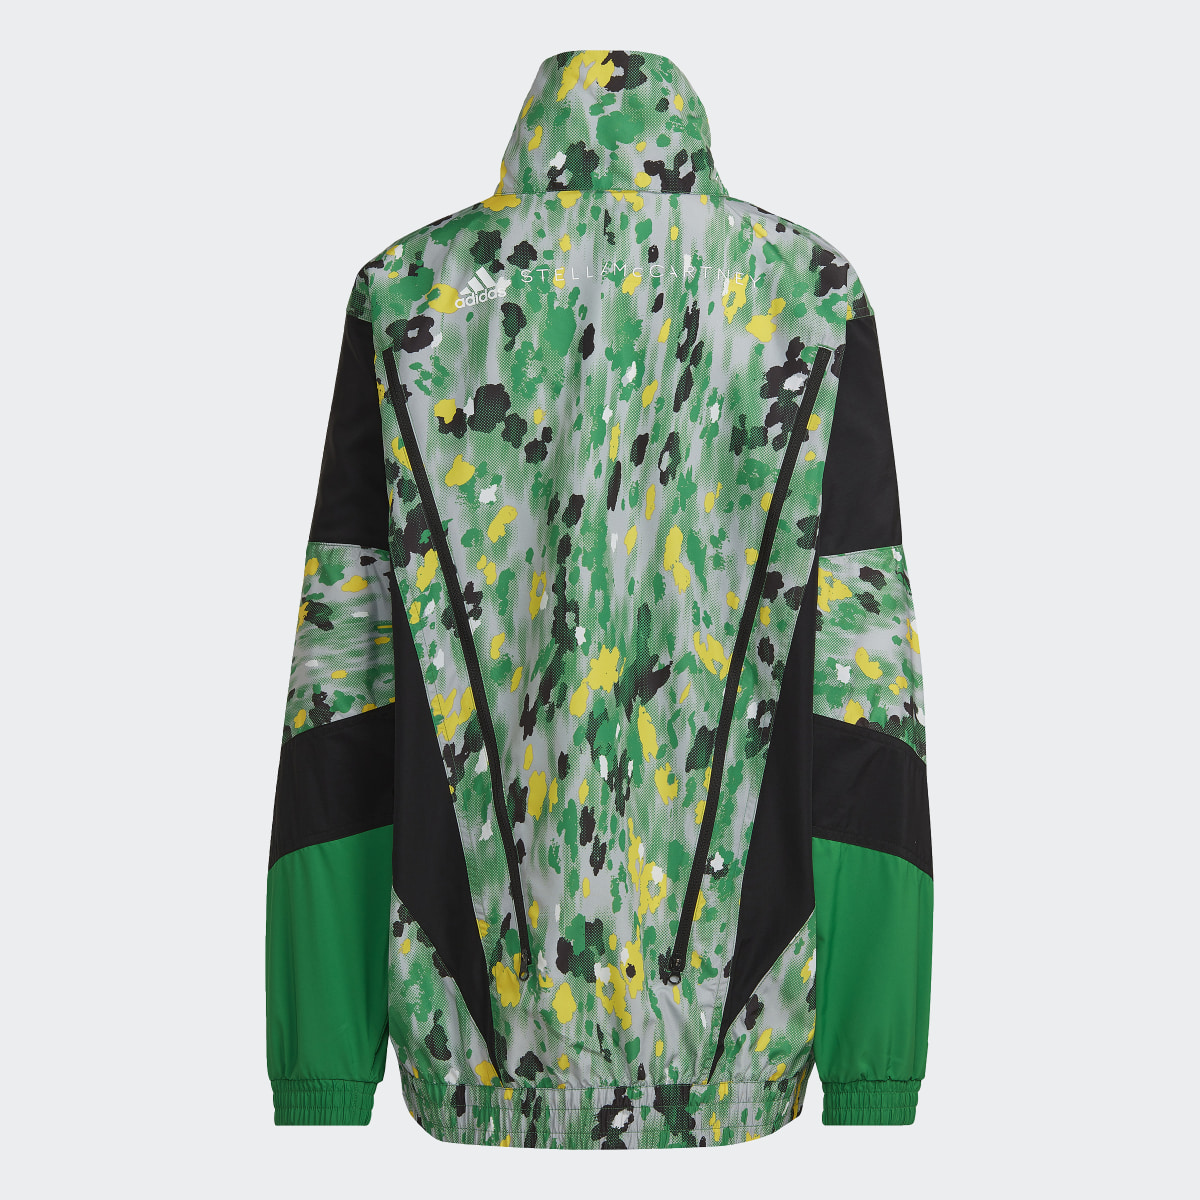 Adidas by Stella McCartney Printed Woven Track Top. 8